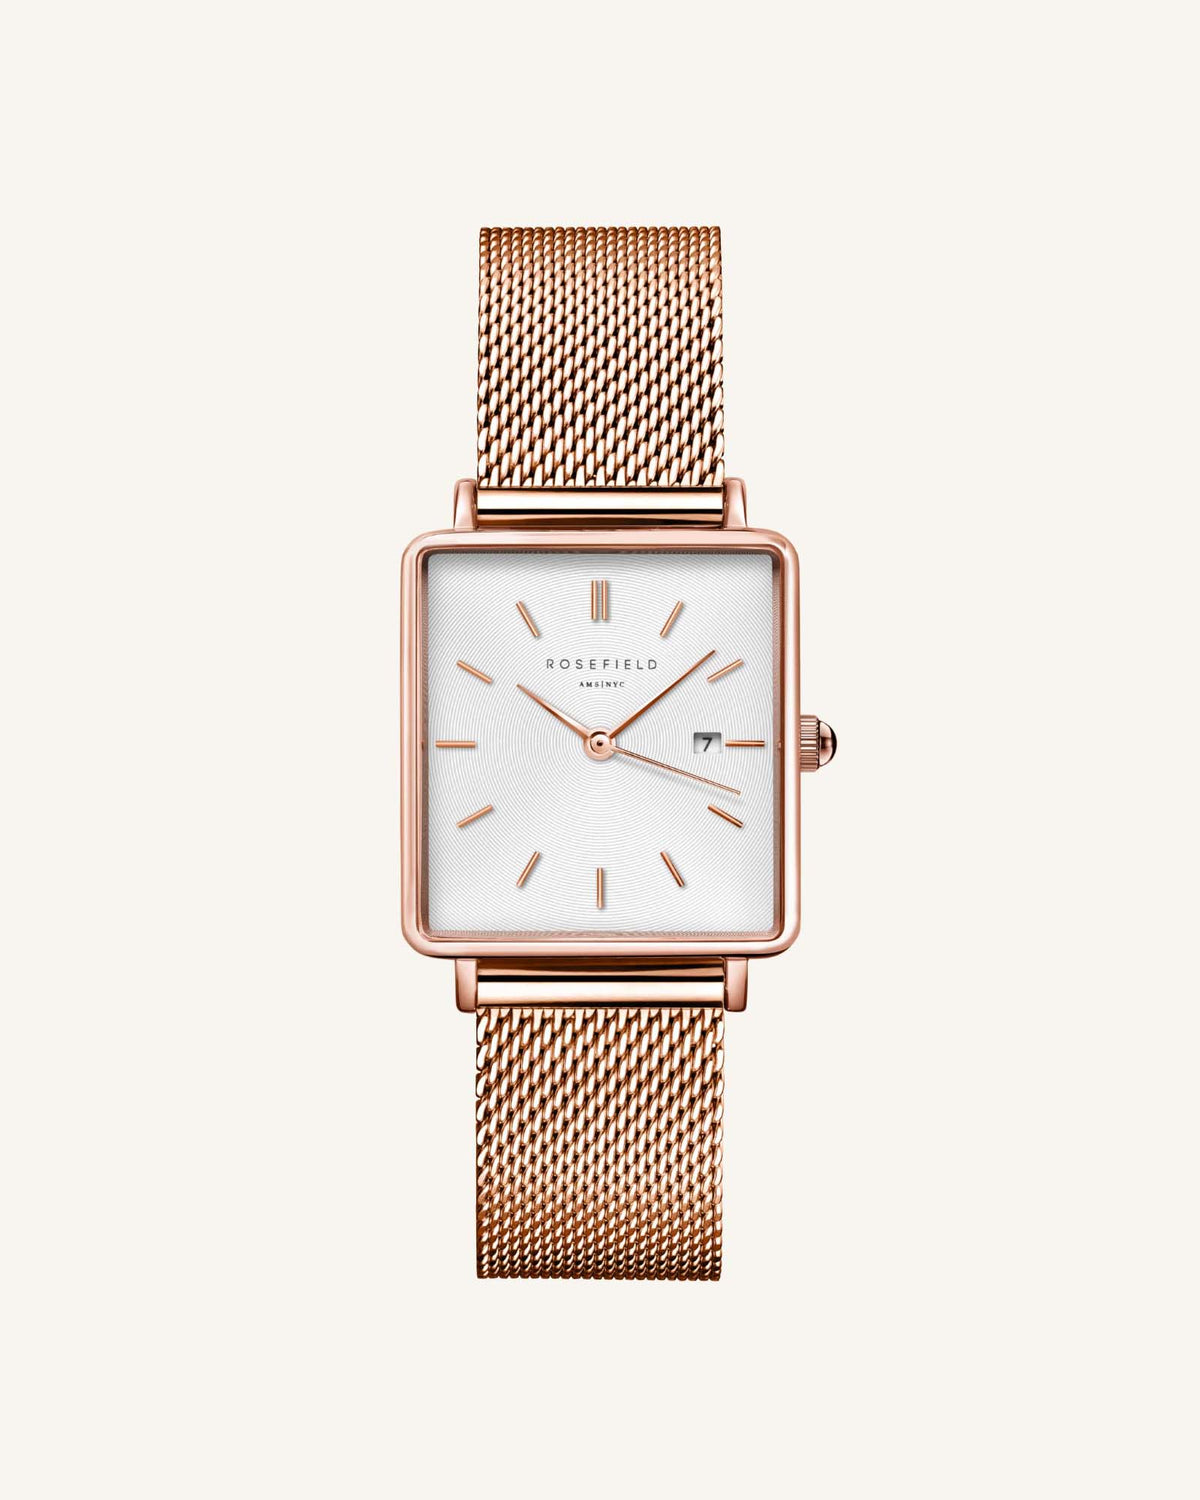 The Boxy Rose Gold Mesh